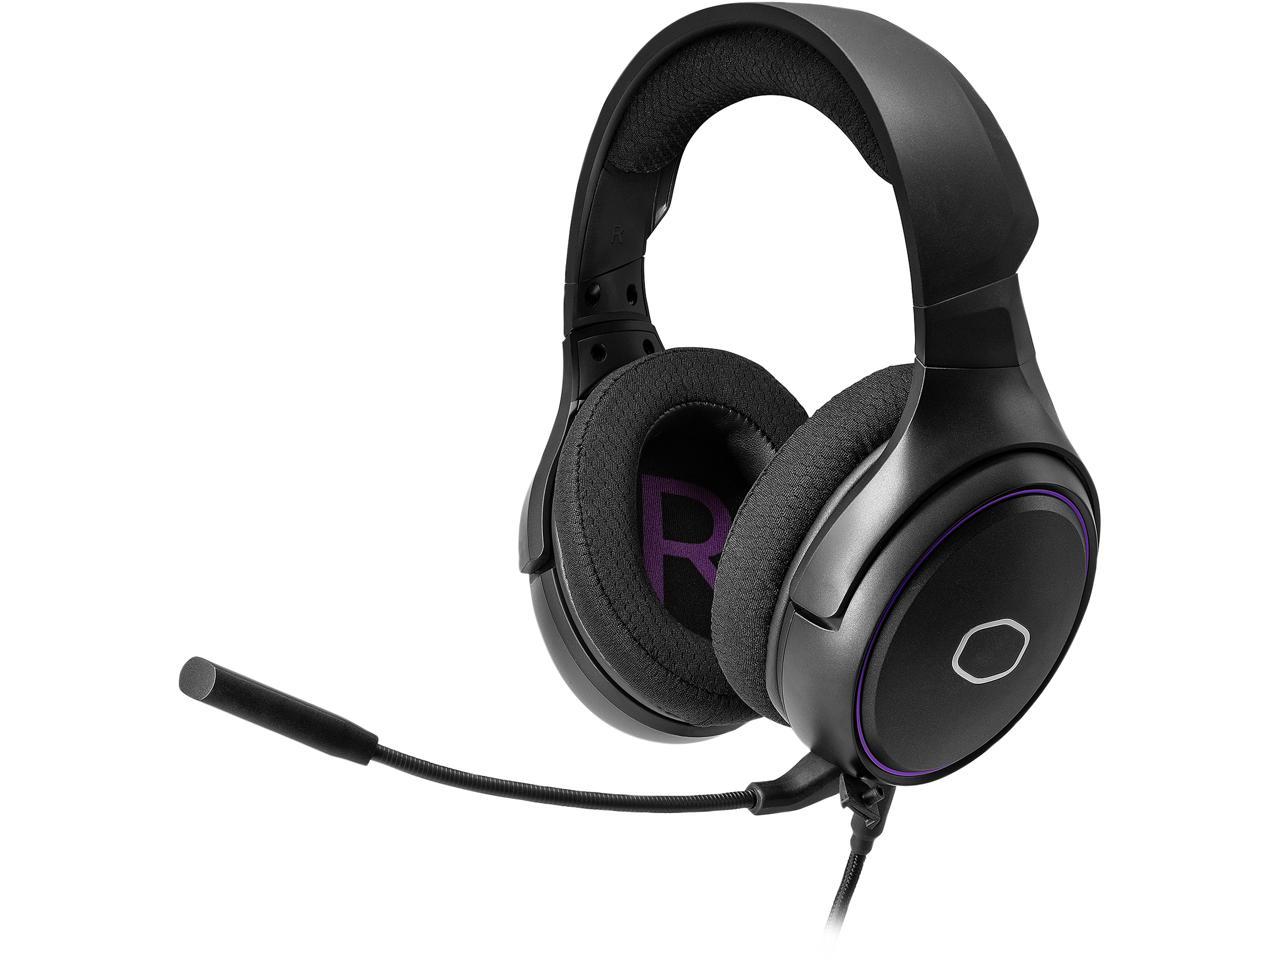 money transfer handicap Detailed Cooler Master MH630 Gaming Headset with Hi-Fi Sound, Omnidirectional Boom  Mic, and PC/Console/Mobile Connectivity - Newegg.com